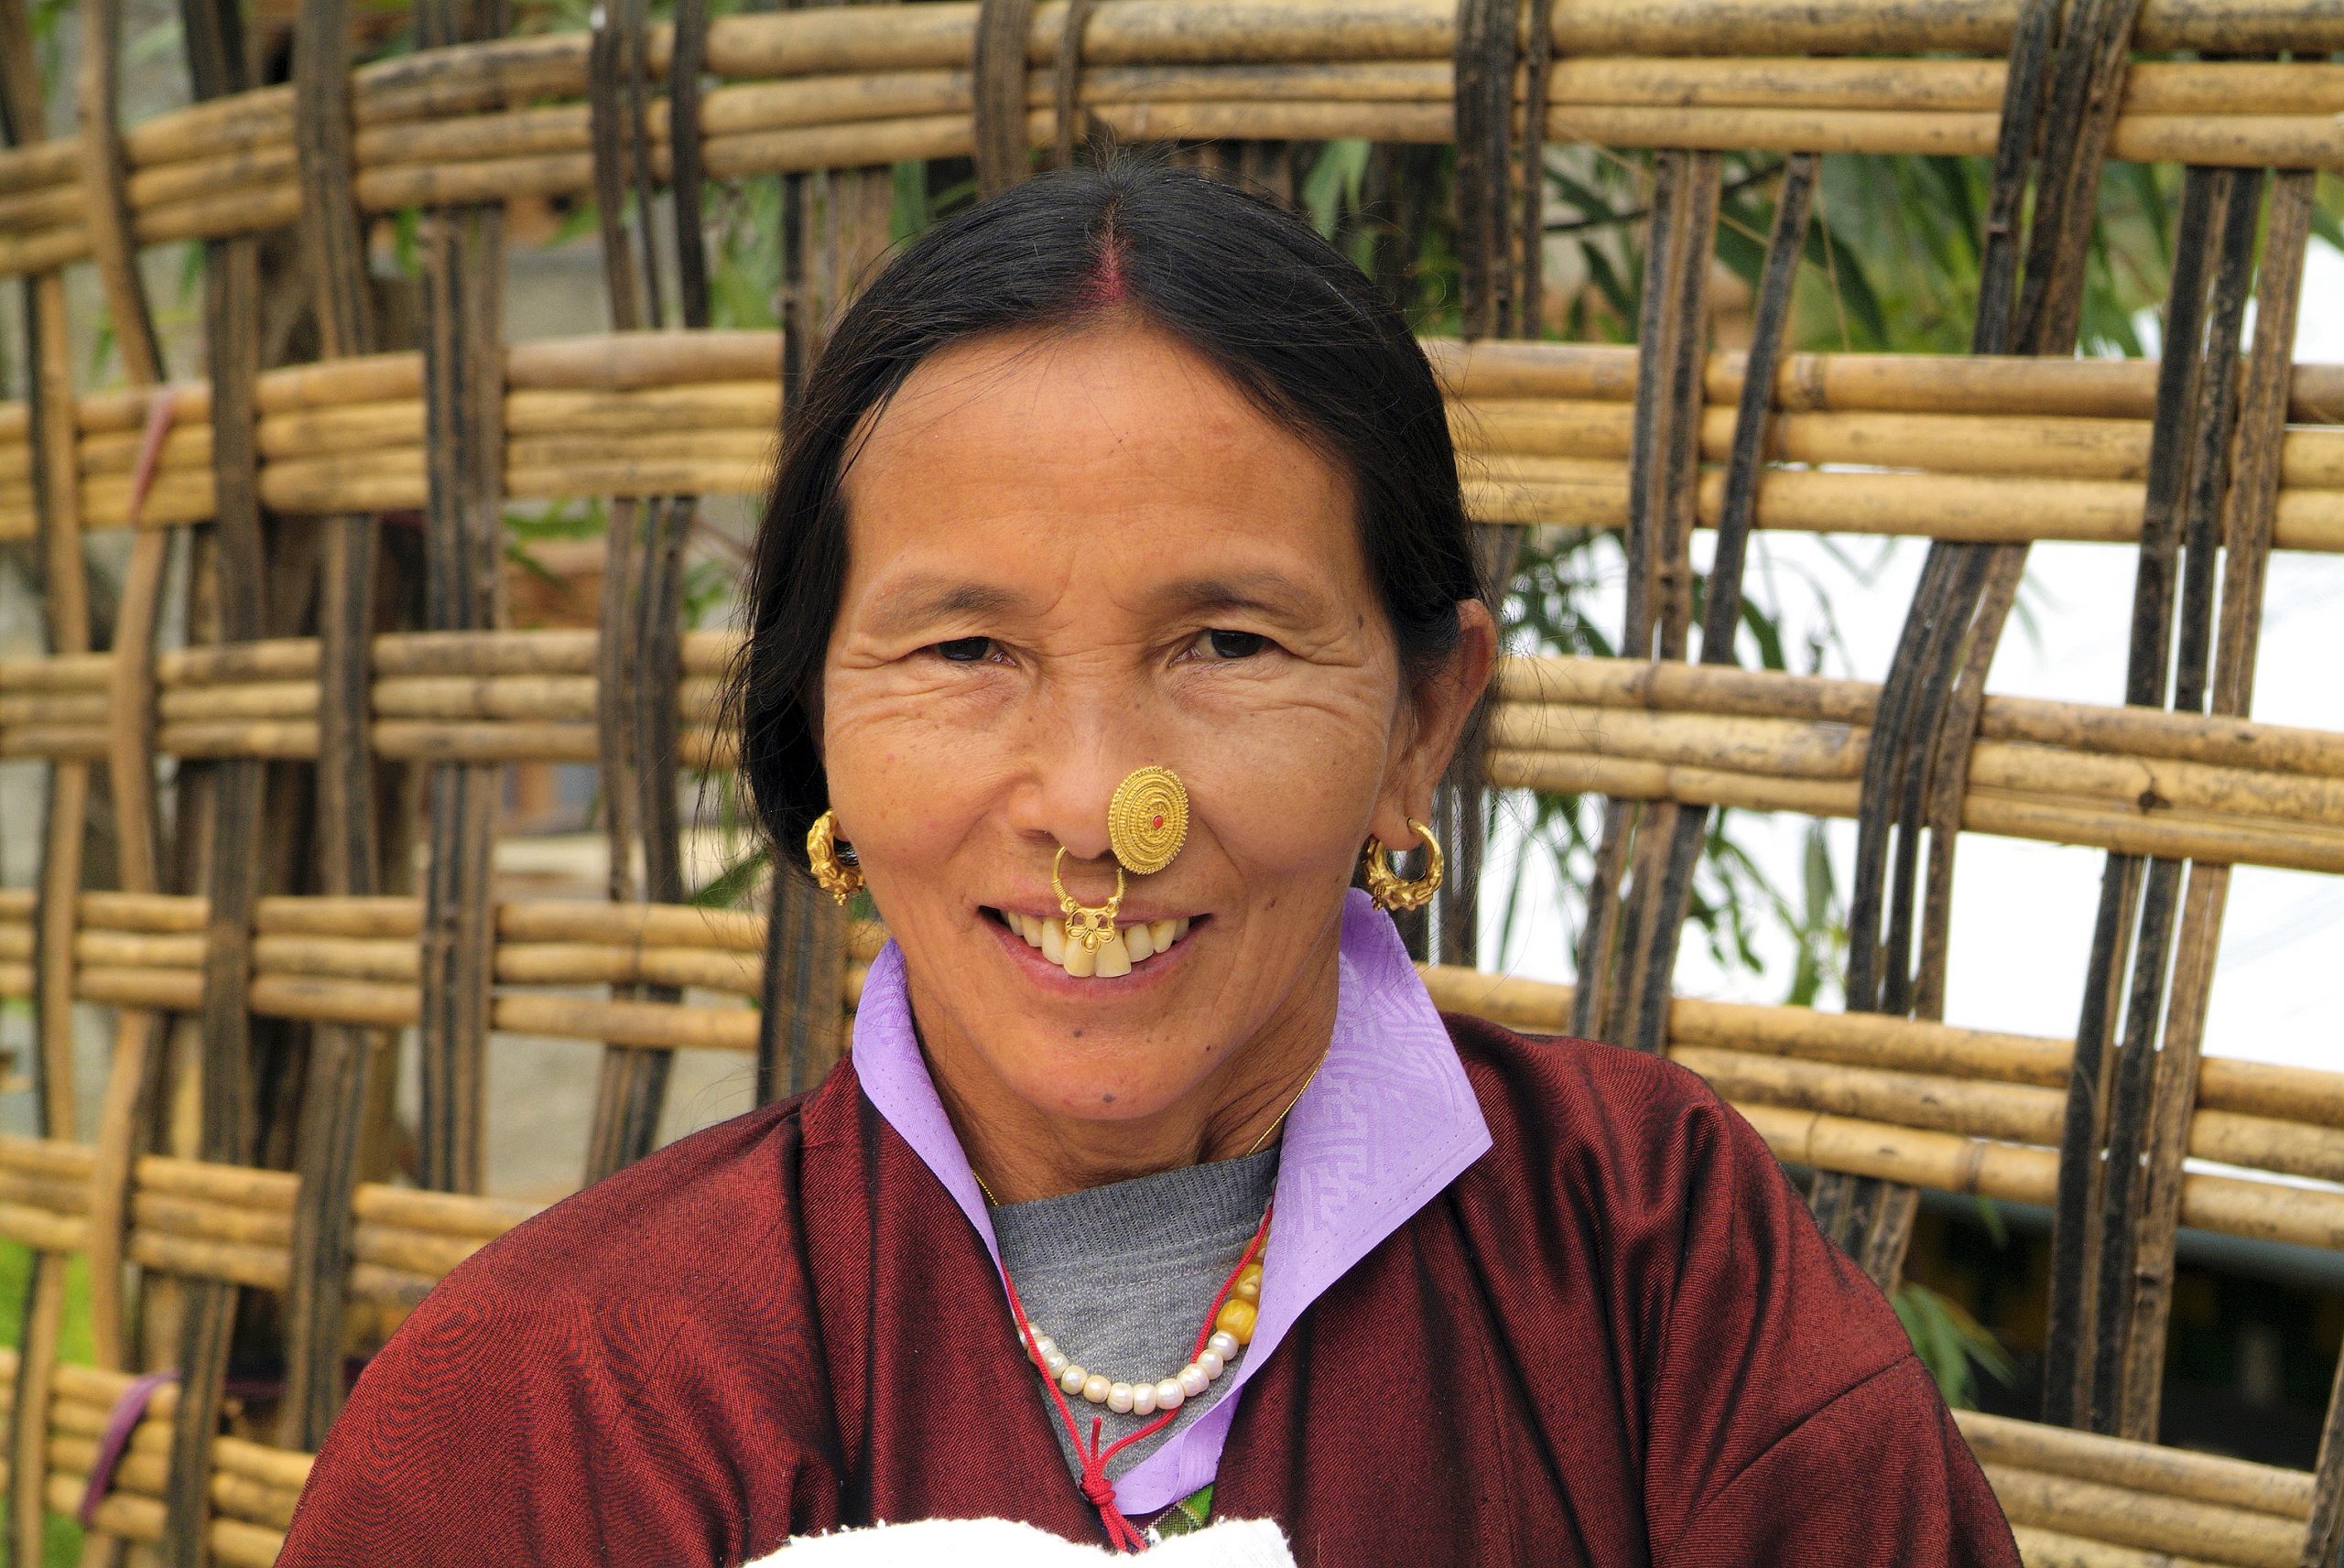 Kurje, Bumthang, Bhutan - September 26, 2007: Unidentified woman with tradittional jewelry in nose and ear